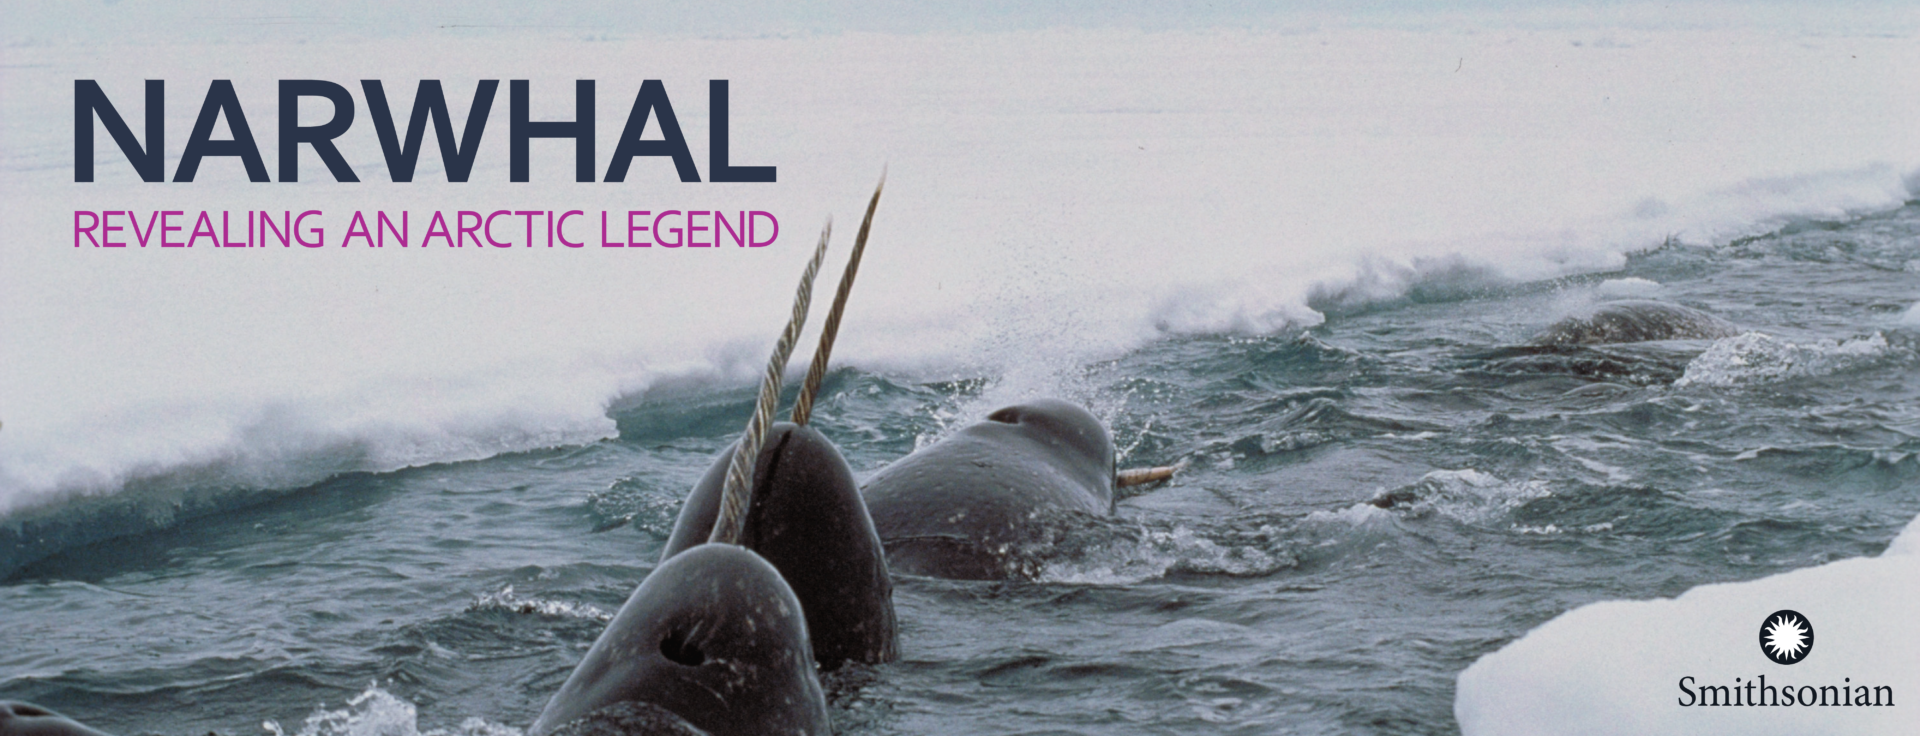 A narwhal under ice with a logo that says, "Narwal: Revealing an Arctic Legend"